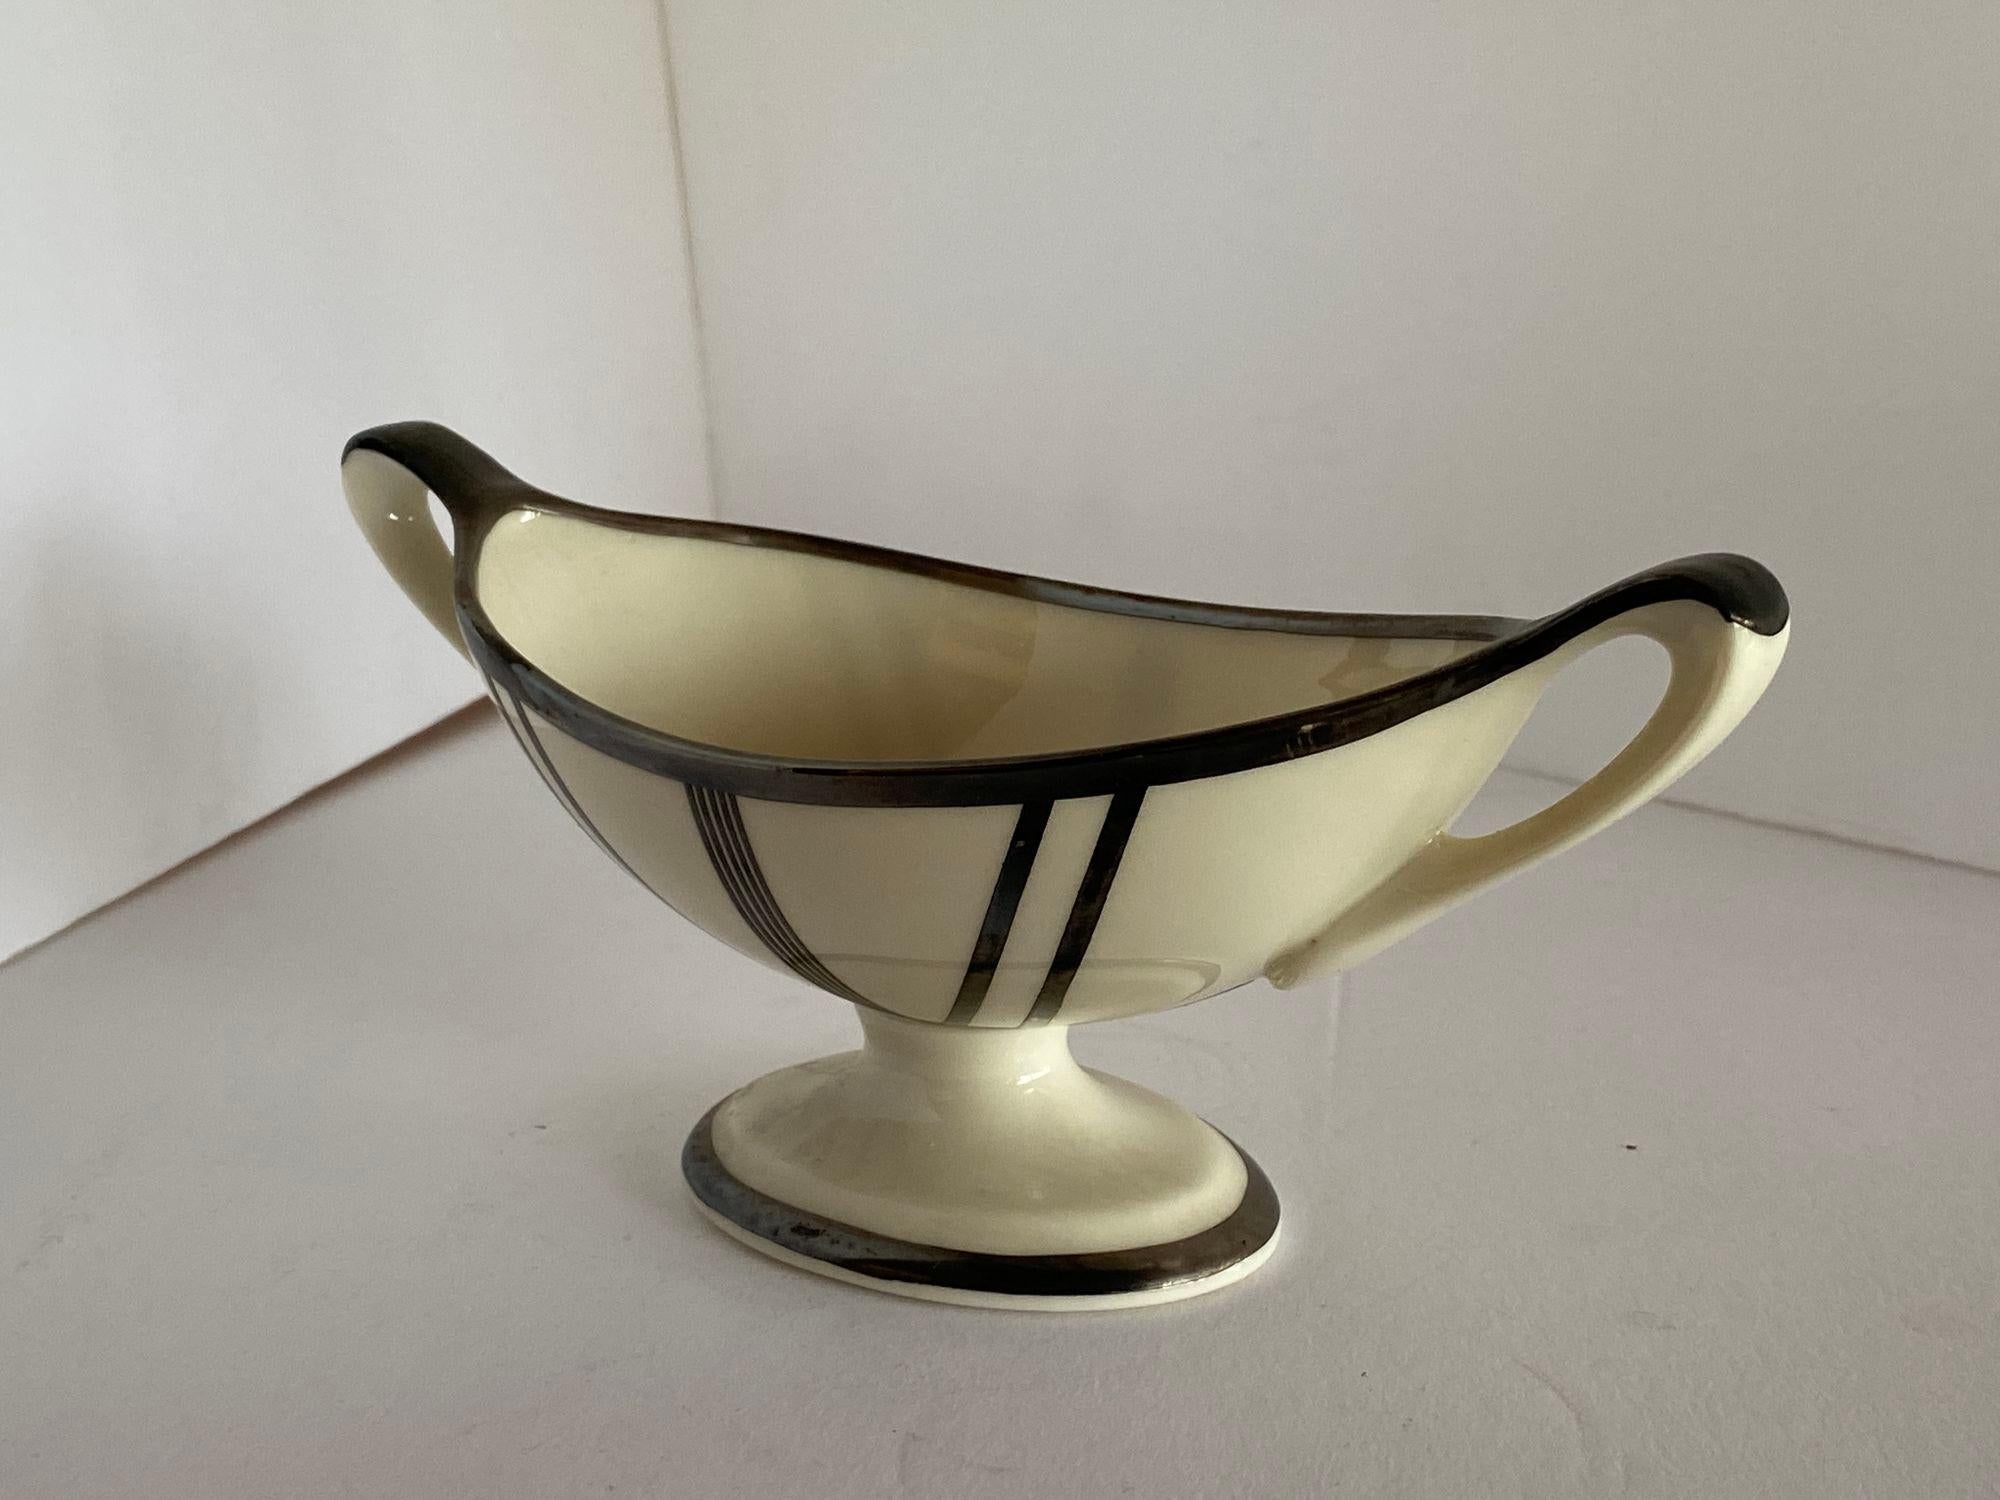 This exquisite sugar bowl, crafted circa 1930, showcases the timeless elegance of Art Deco design with a distinctive stepped silhouette. Manufactured by Lenox, renowned for its fine ceramics, this piece is adorned with a sterling silver overlay,